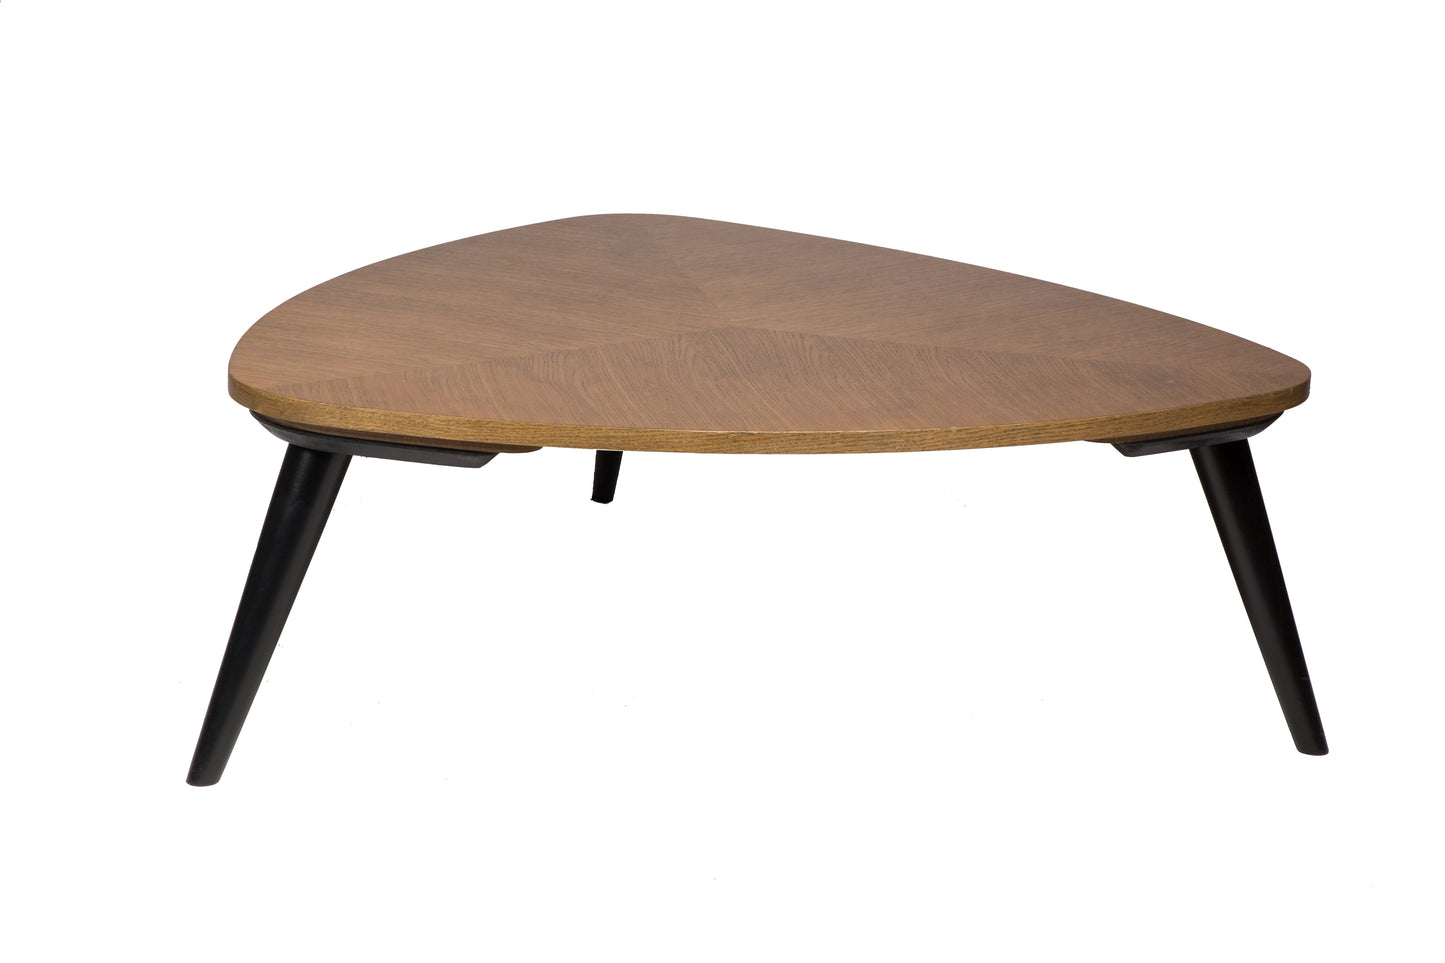 Warm wood coffee table with natural grain and ample surface space